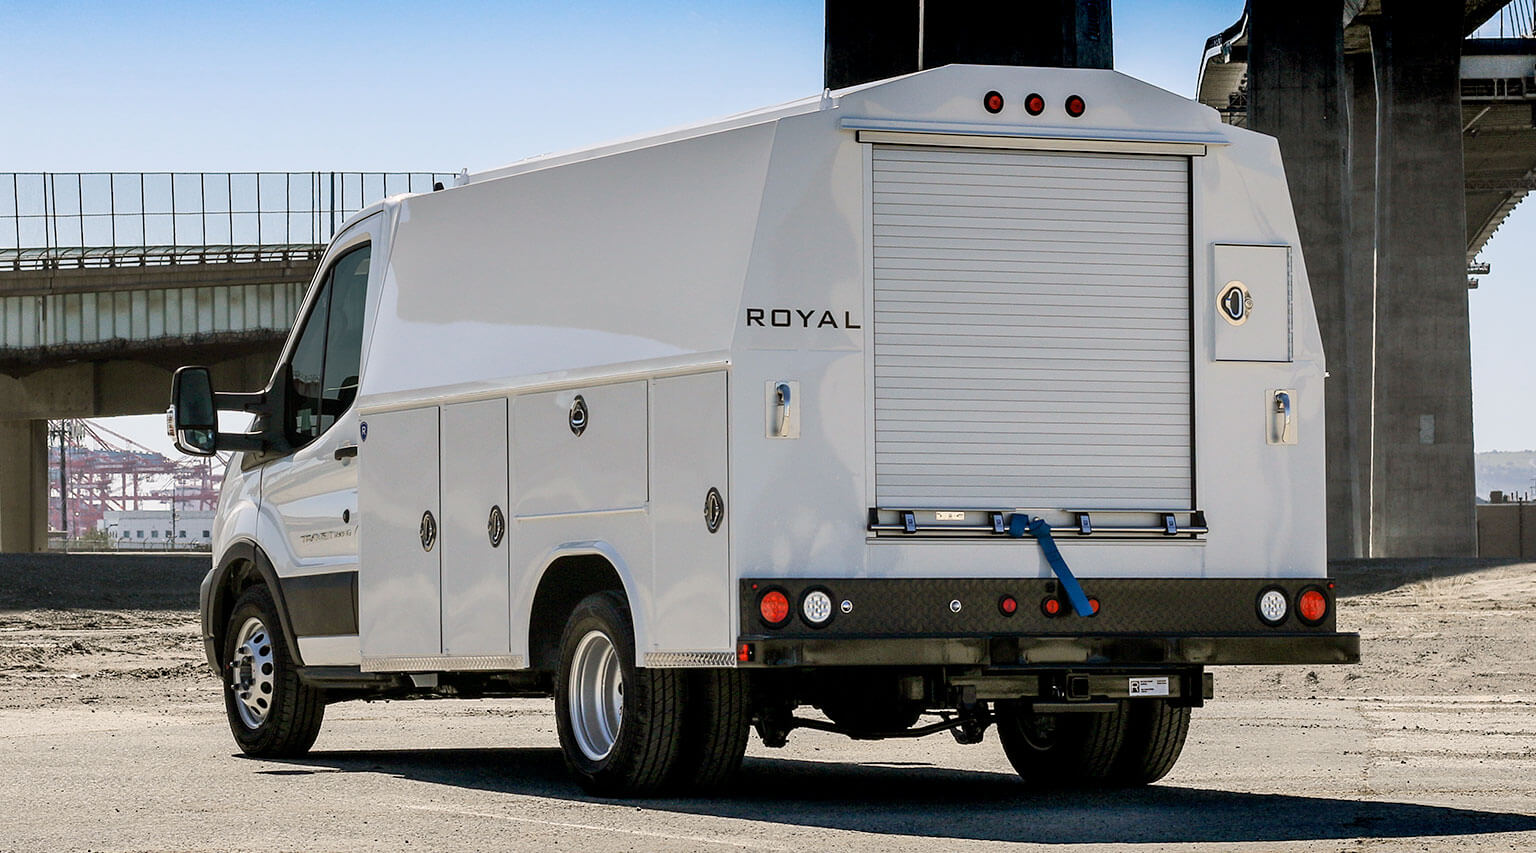 Transit 125 Super Structure 60 inch tall DRW truck body by Royal Truck Body